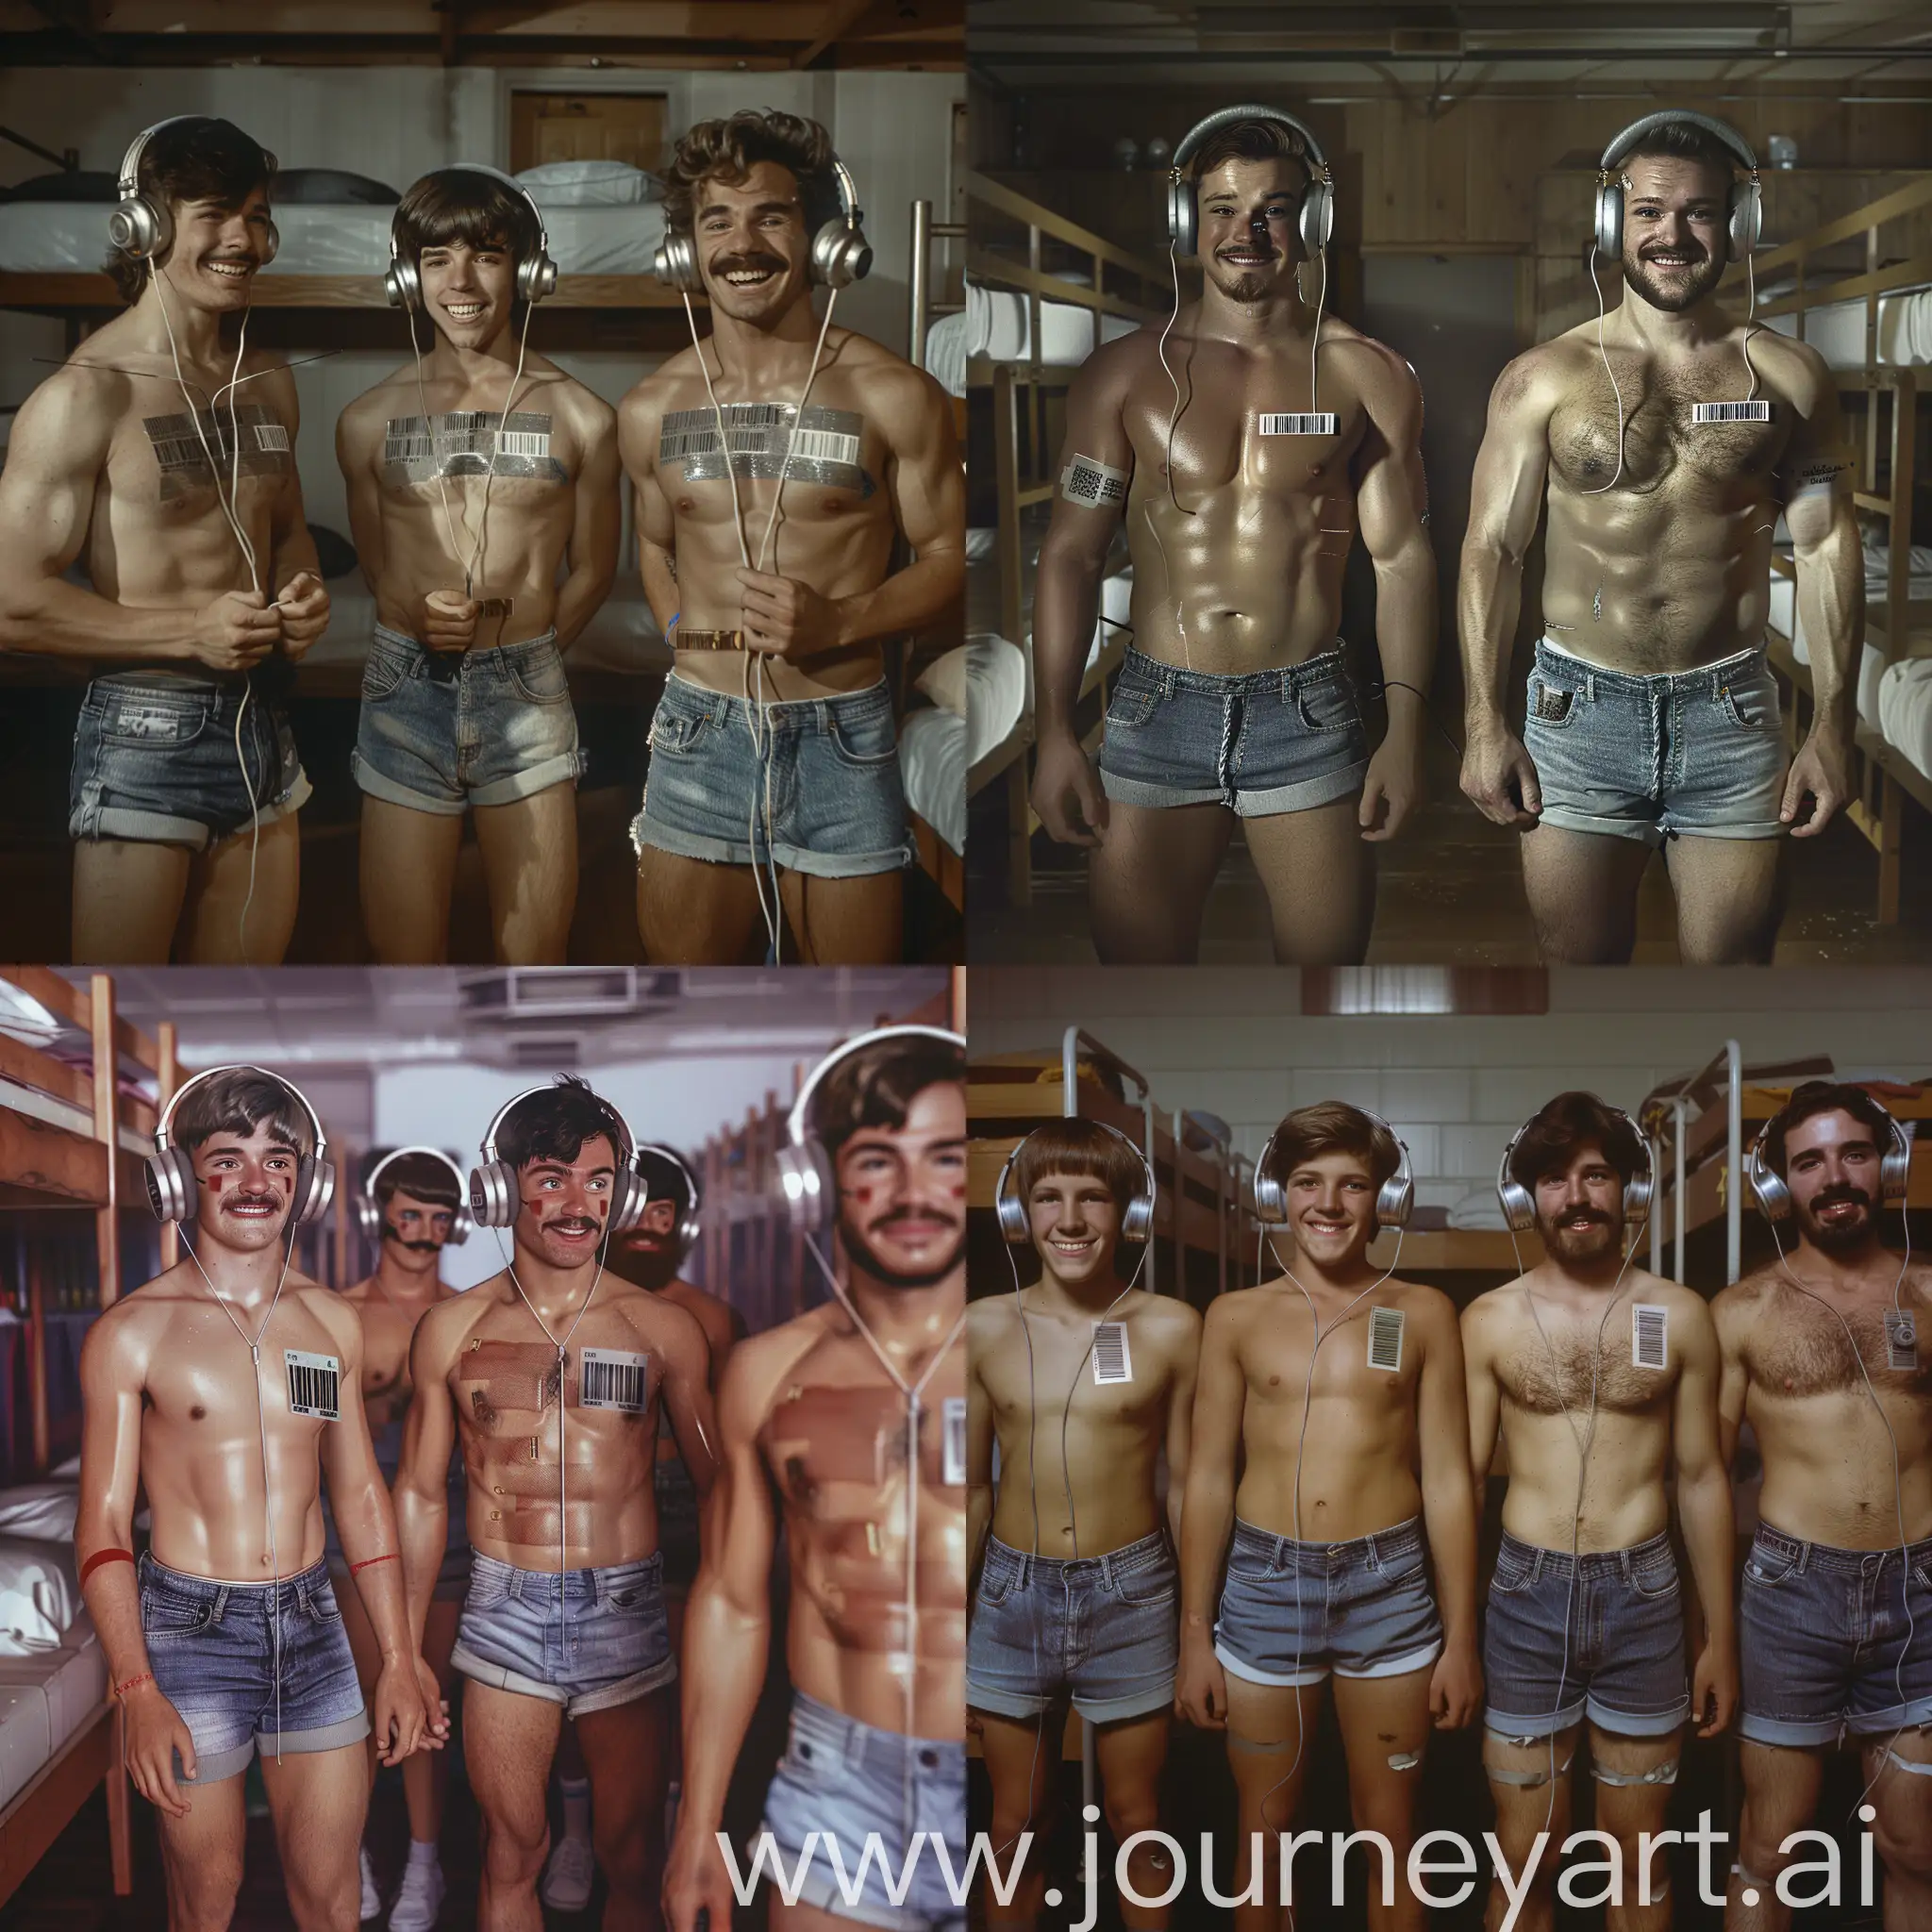 Muscular-Men-in-1980s-Youth-Hostel-Dorm-Silver-Headphones-and-Denim-Shorts